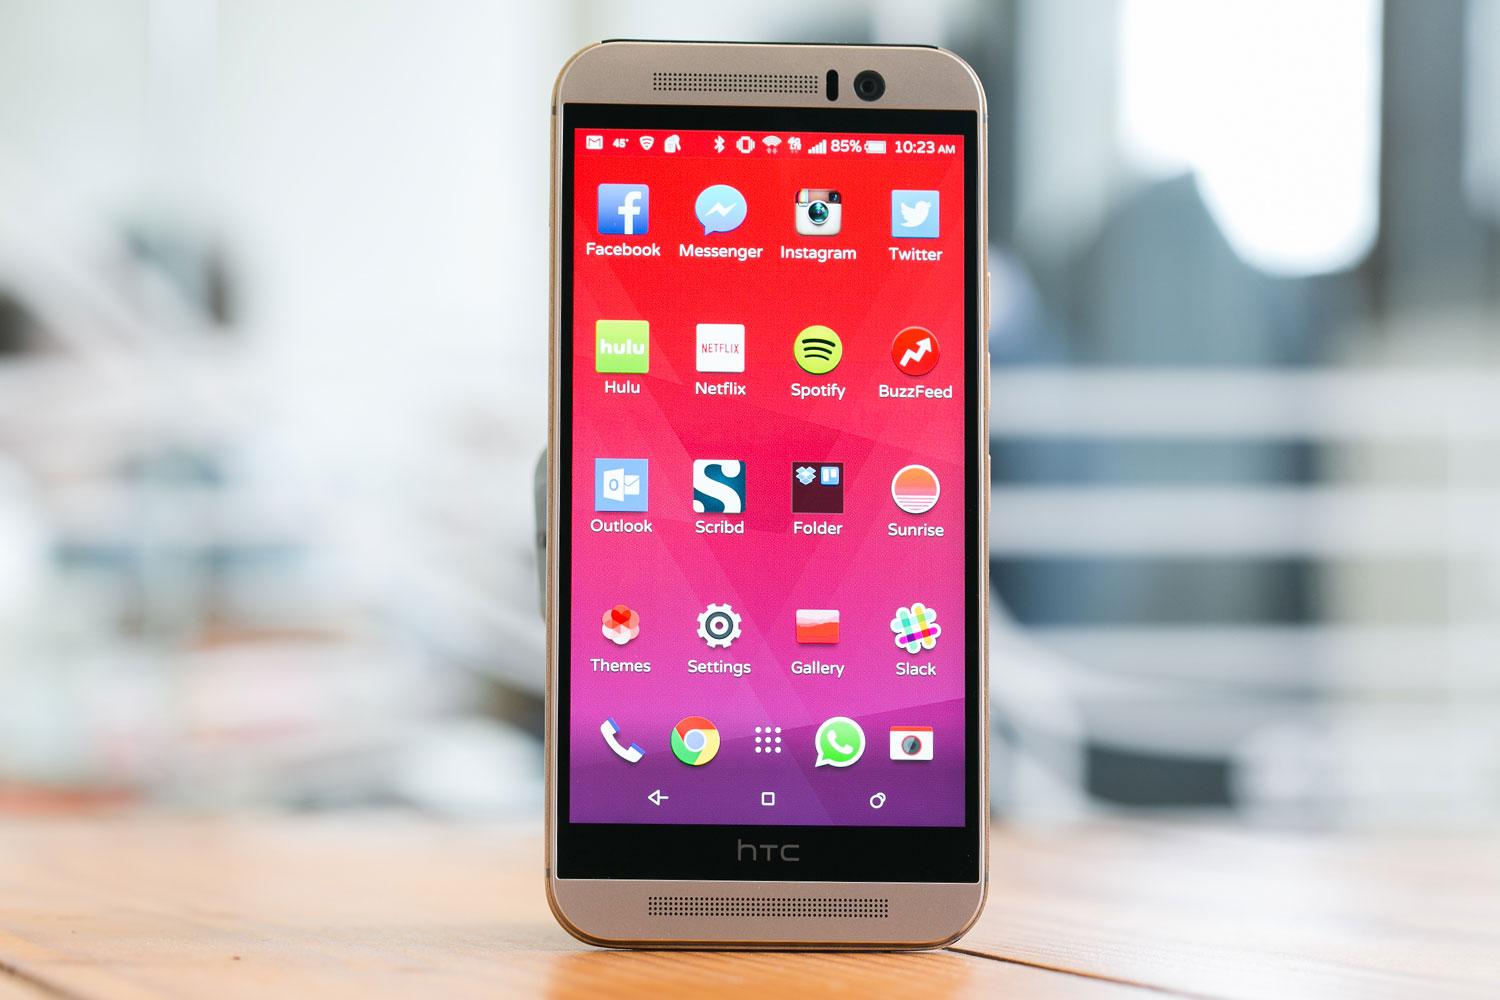 wakker worden fenomeen Wreed HTC One M9 Review: A Great Phone That Should Be Better | Digital Trends